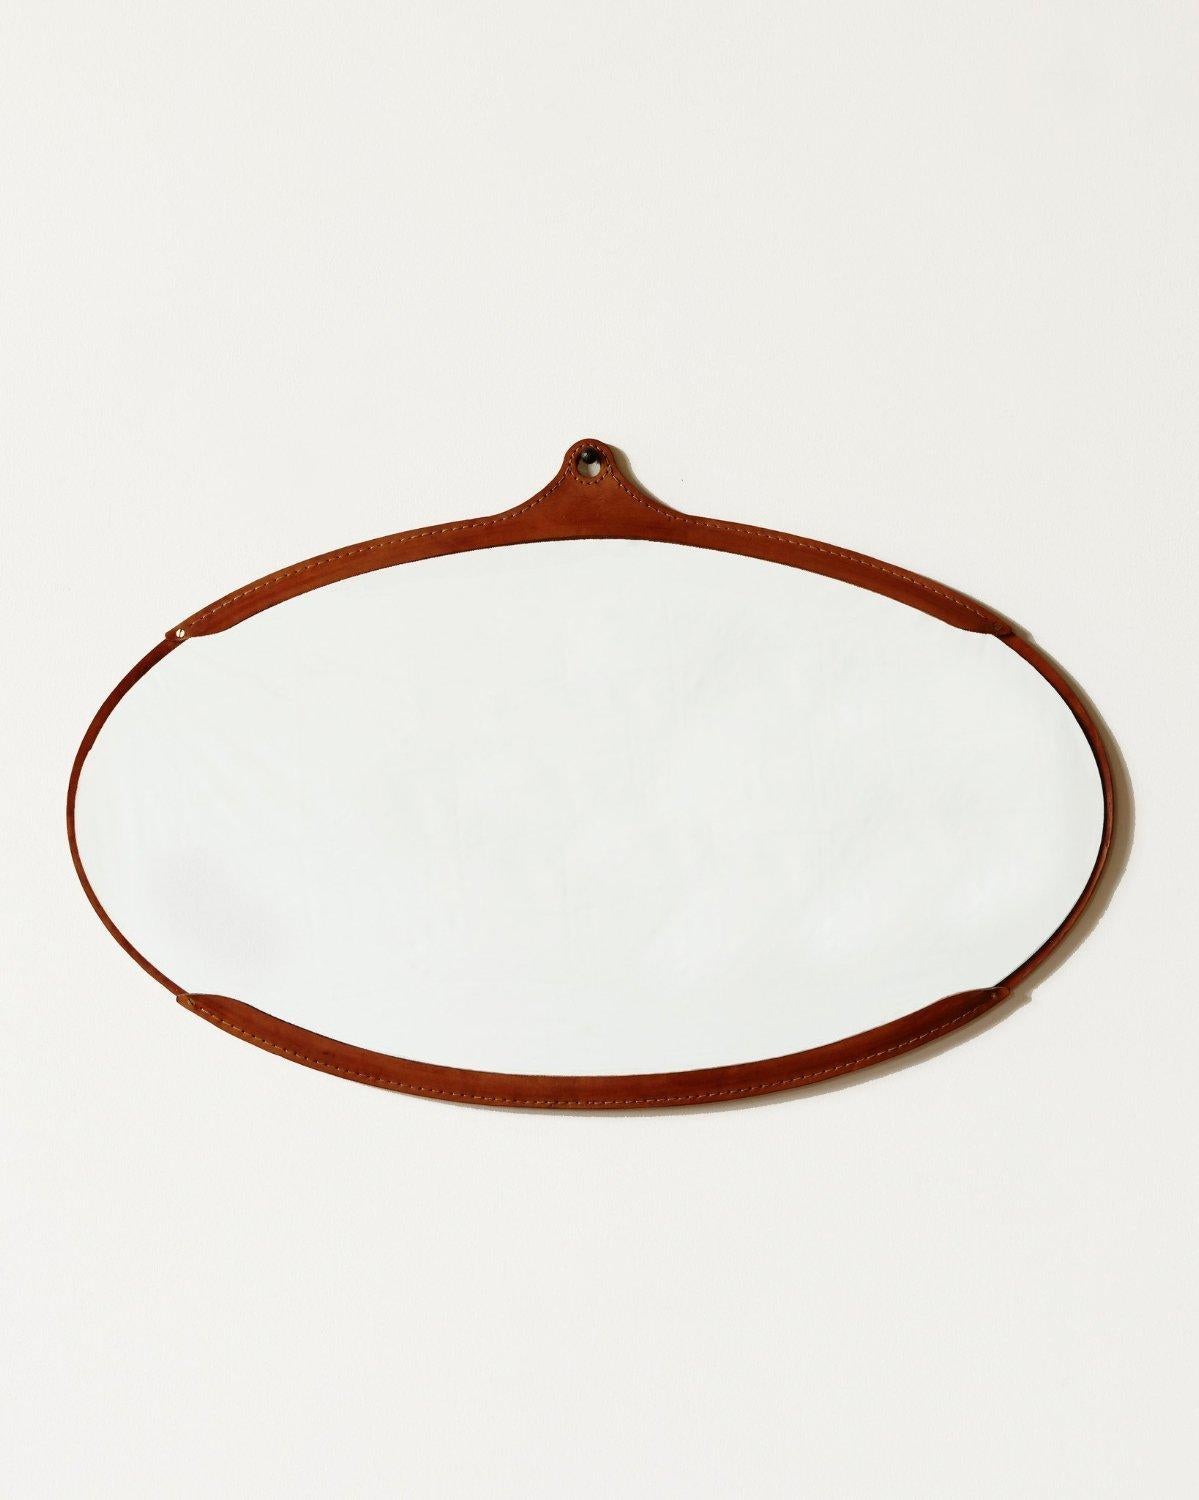 The fairmount wide oval mirror is a hand-stitched leather mirror with a frame made from natural vegetable tanned leather which will vary in color and darken slightly with age. The mirror sits inside the frame like a pocket. It comes with an iron